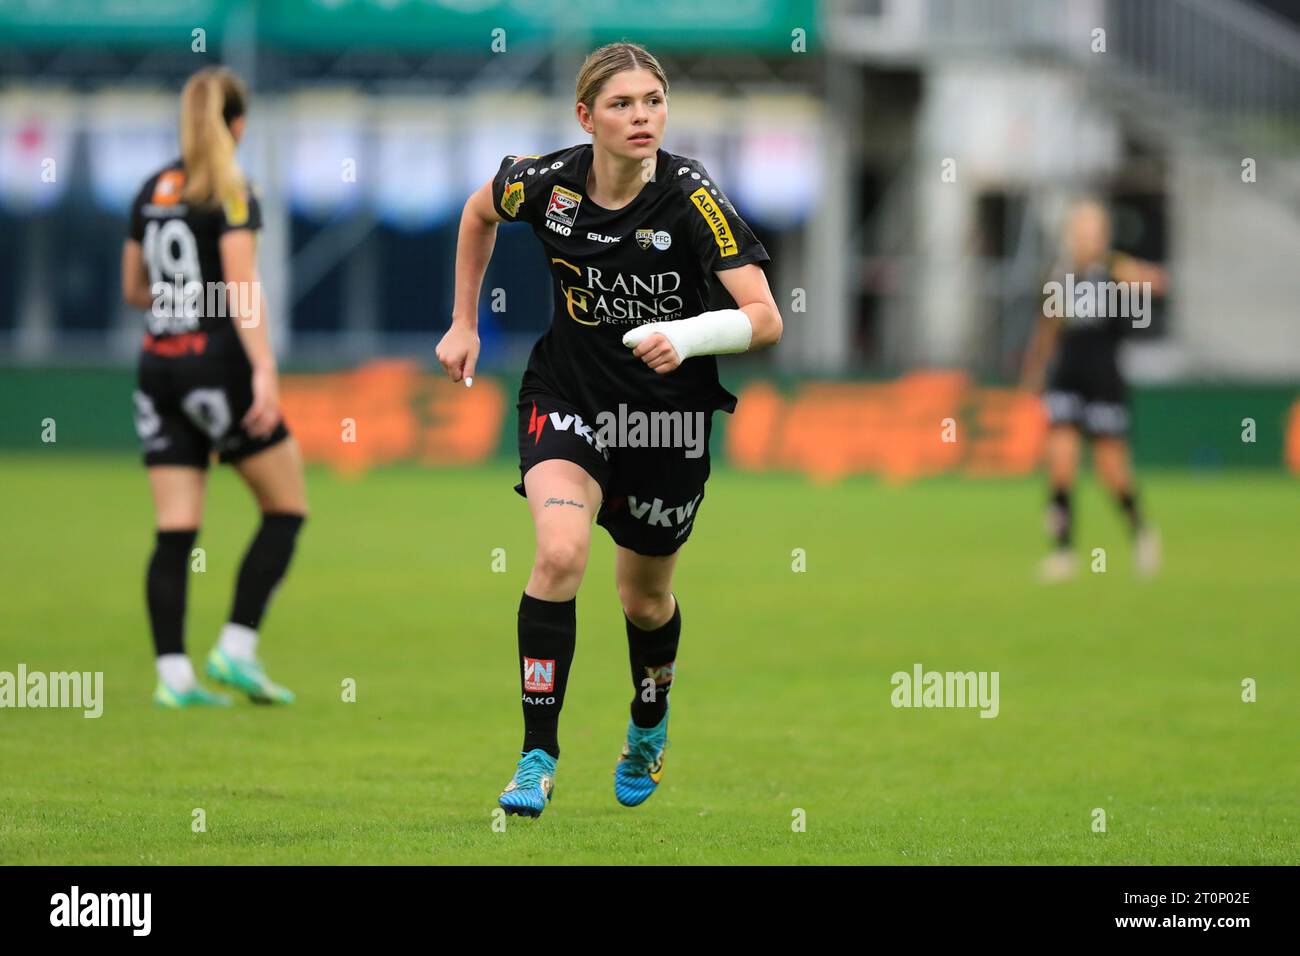 Eileen Campbell (7 Altach) during the Admiral Frauen Bundesliga match First Vienna FC vs SCR Altach at Hohe Warte  (Tom Seiss/ SPP) Stock Photo